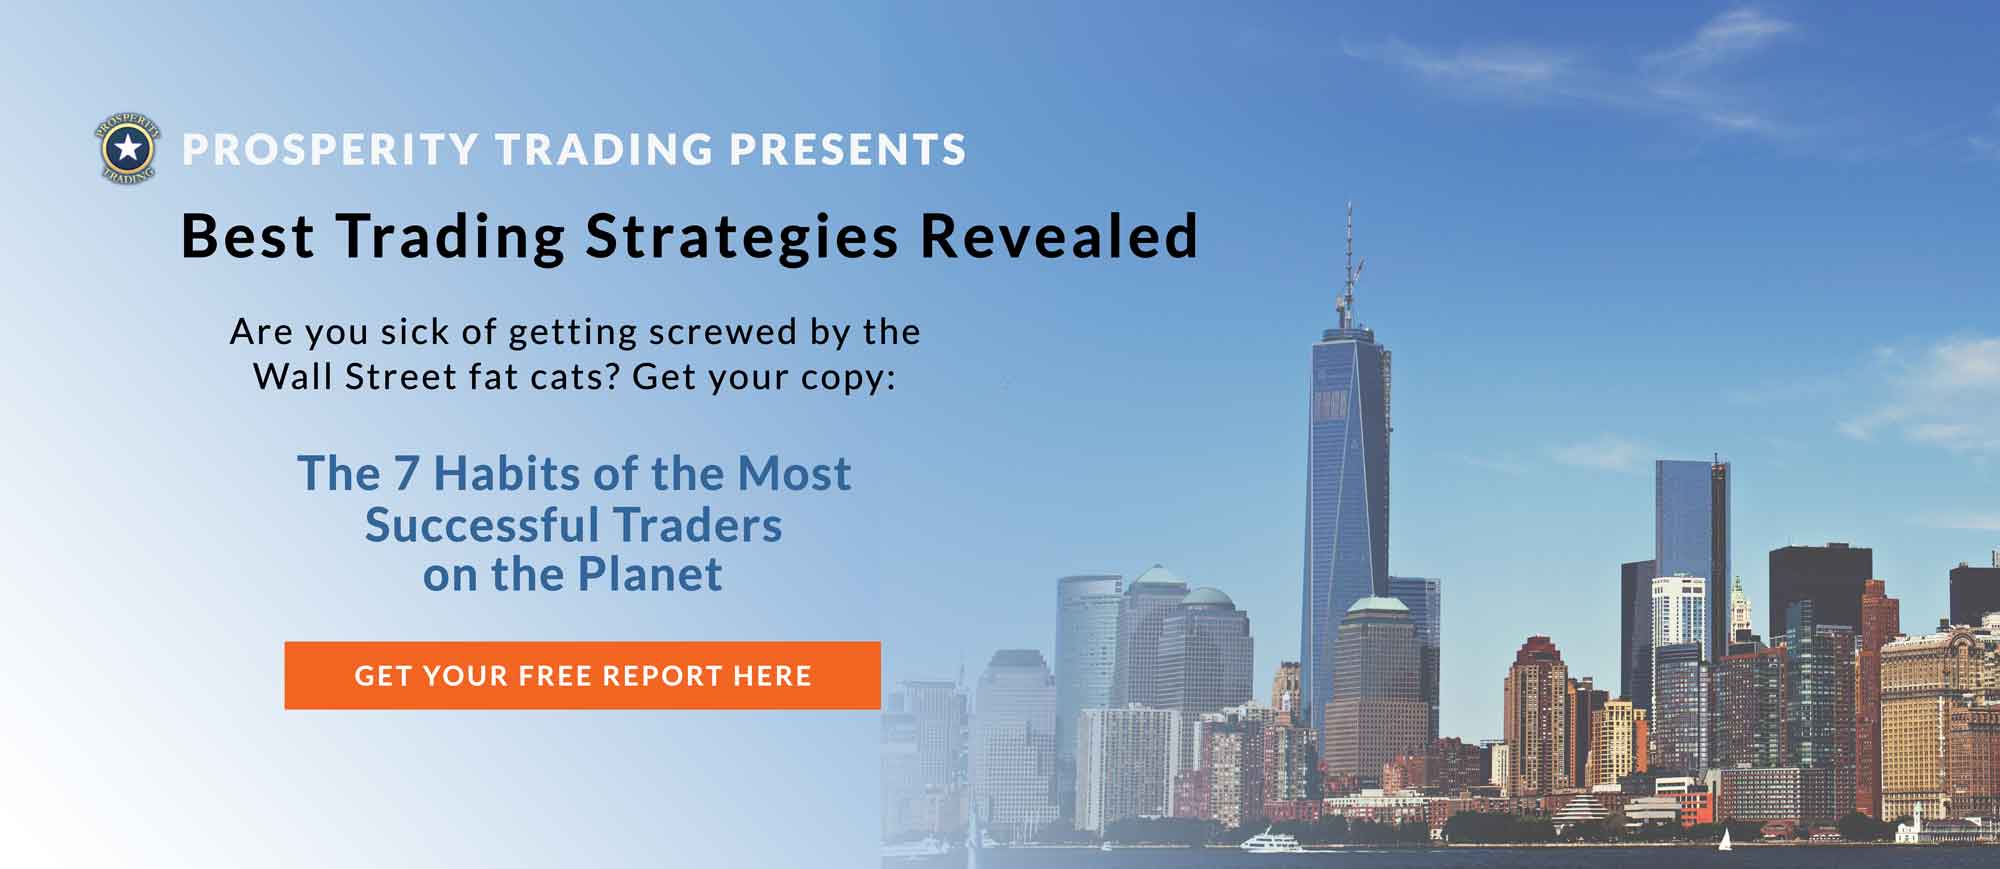 Best Trading Strategies Revealed - Get Your Free Report